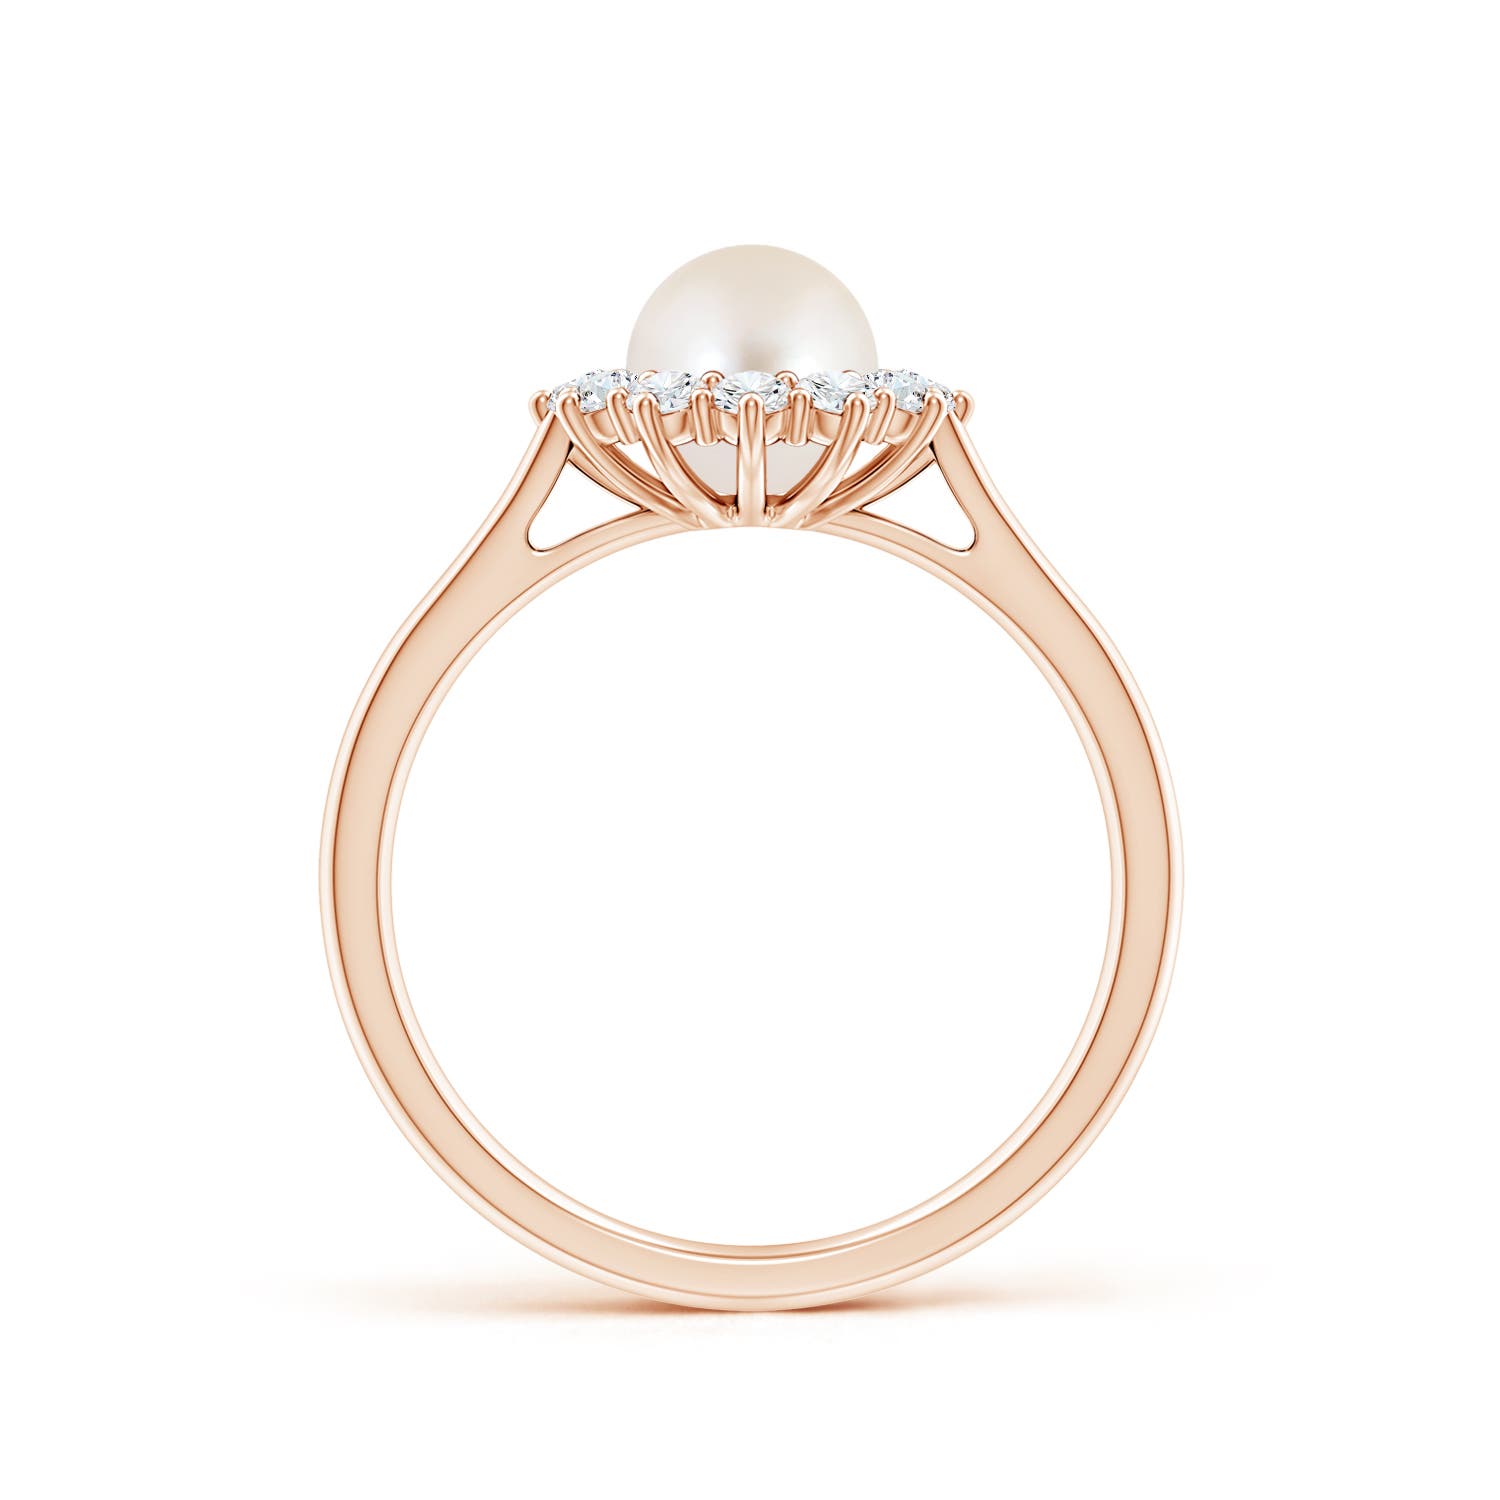 AAAA / 1.88 CT / 14 KT Rose Gold